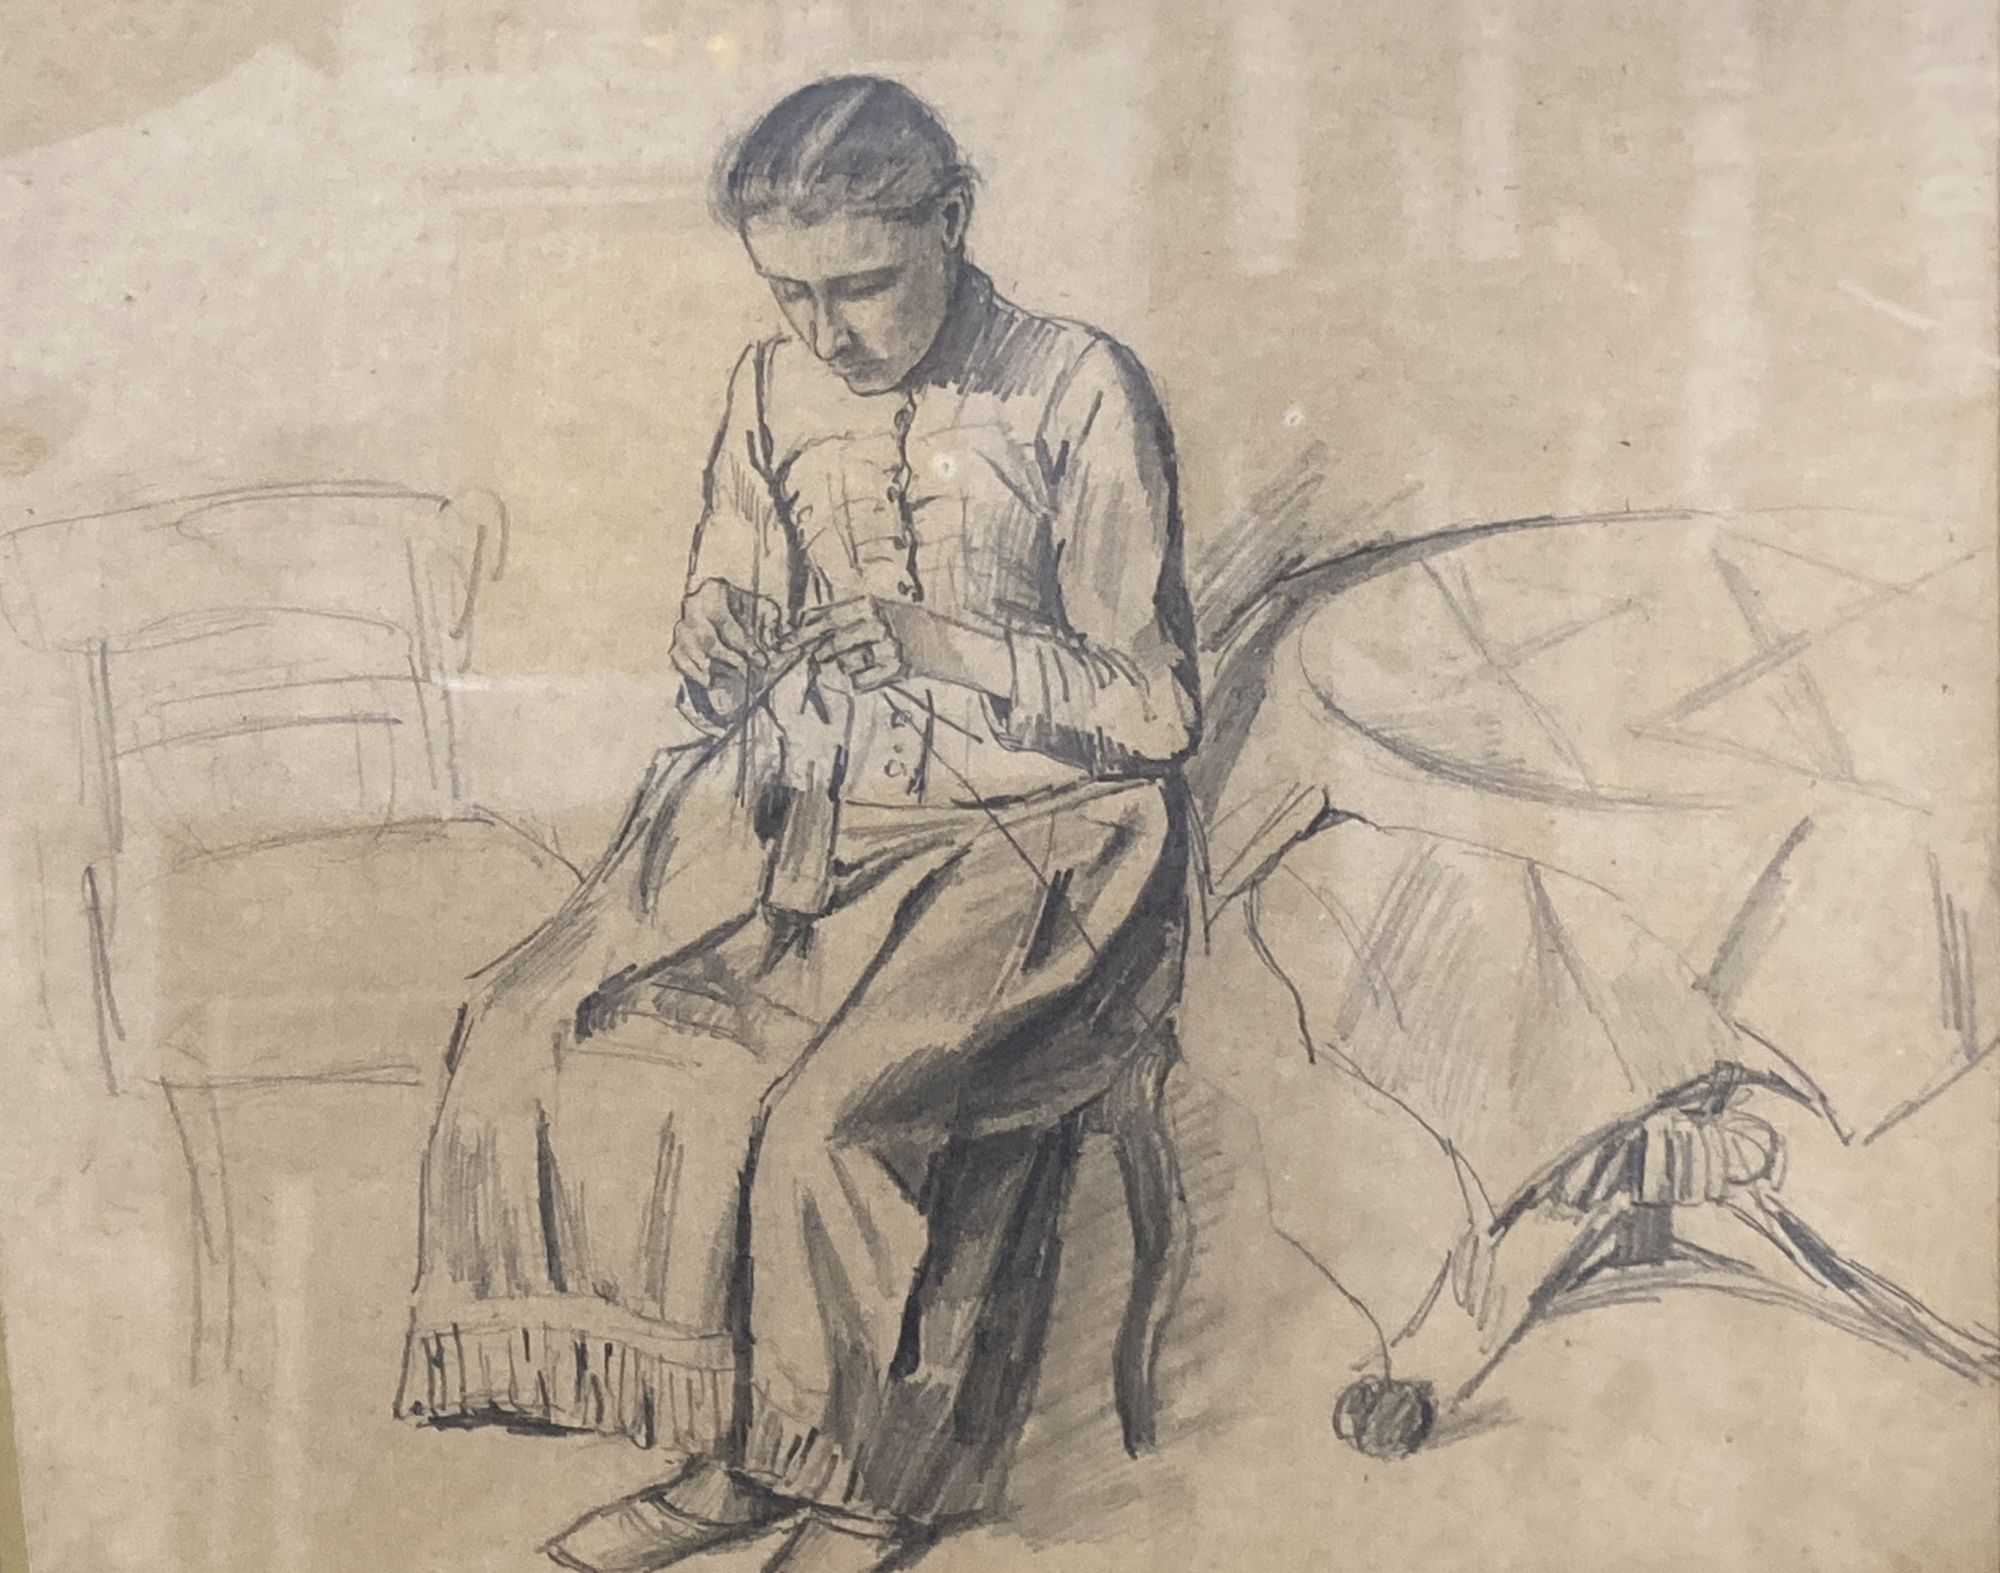 Ernest Weber (German, 1863-1959), pencil drawing, Knitting a sock, 22 x 25cm with three sketches by other hands